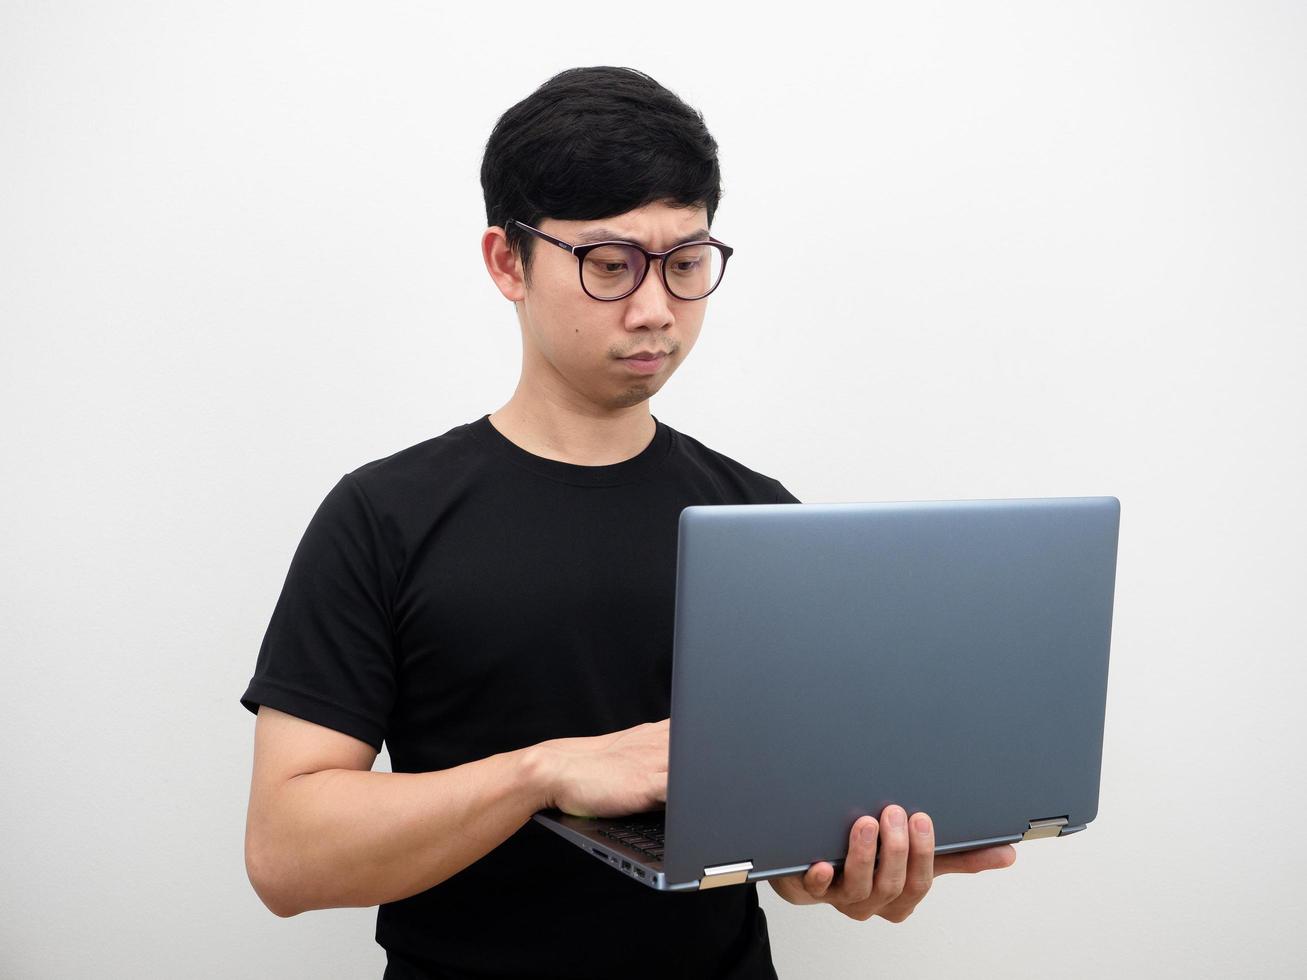 Asian man wearing glasses using laptop in hand serious face on white background photo